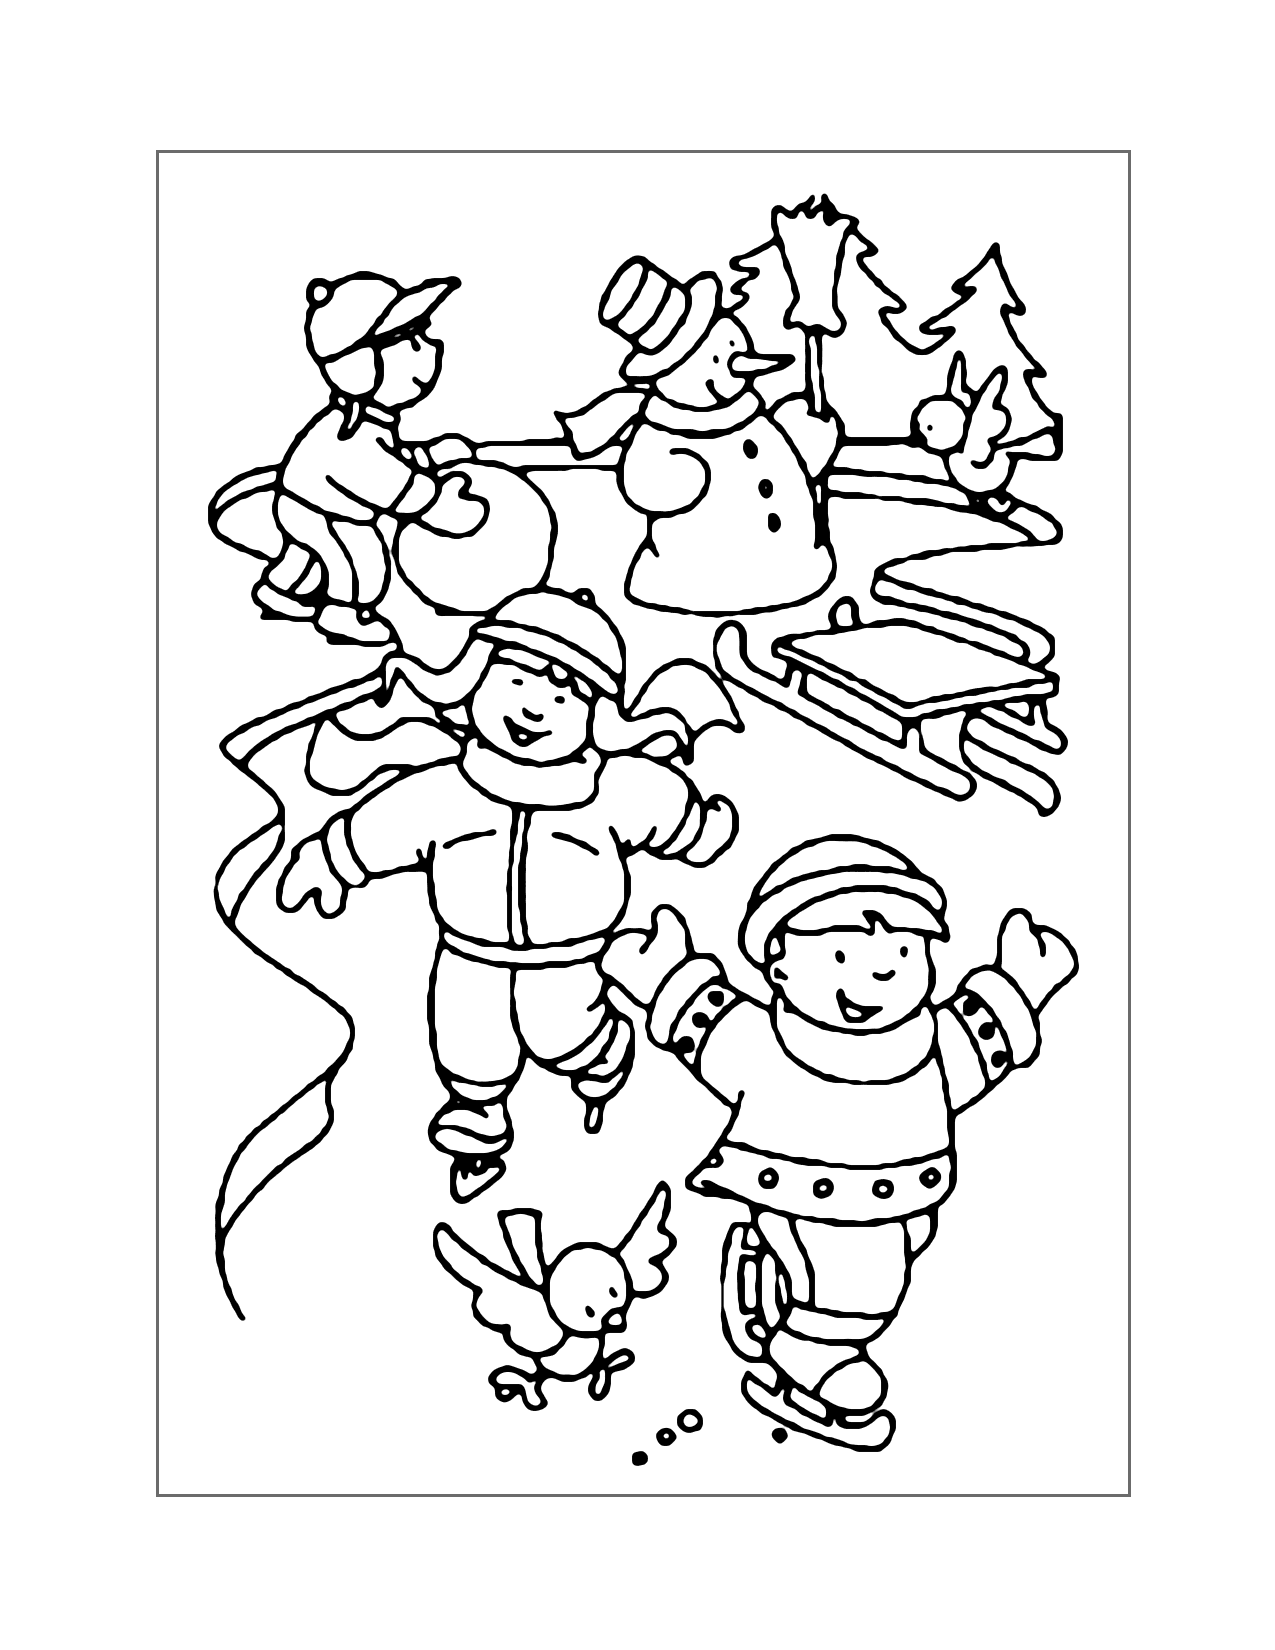 January Activities Coloring Page